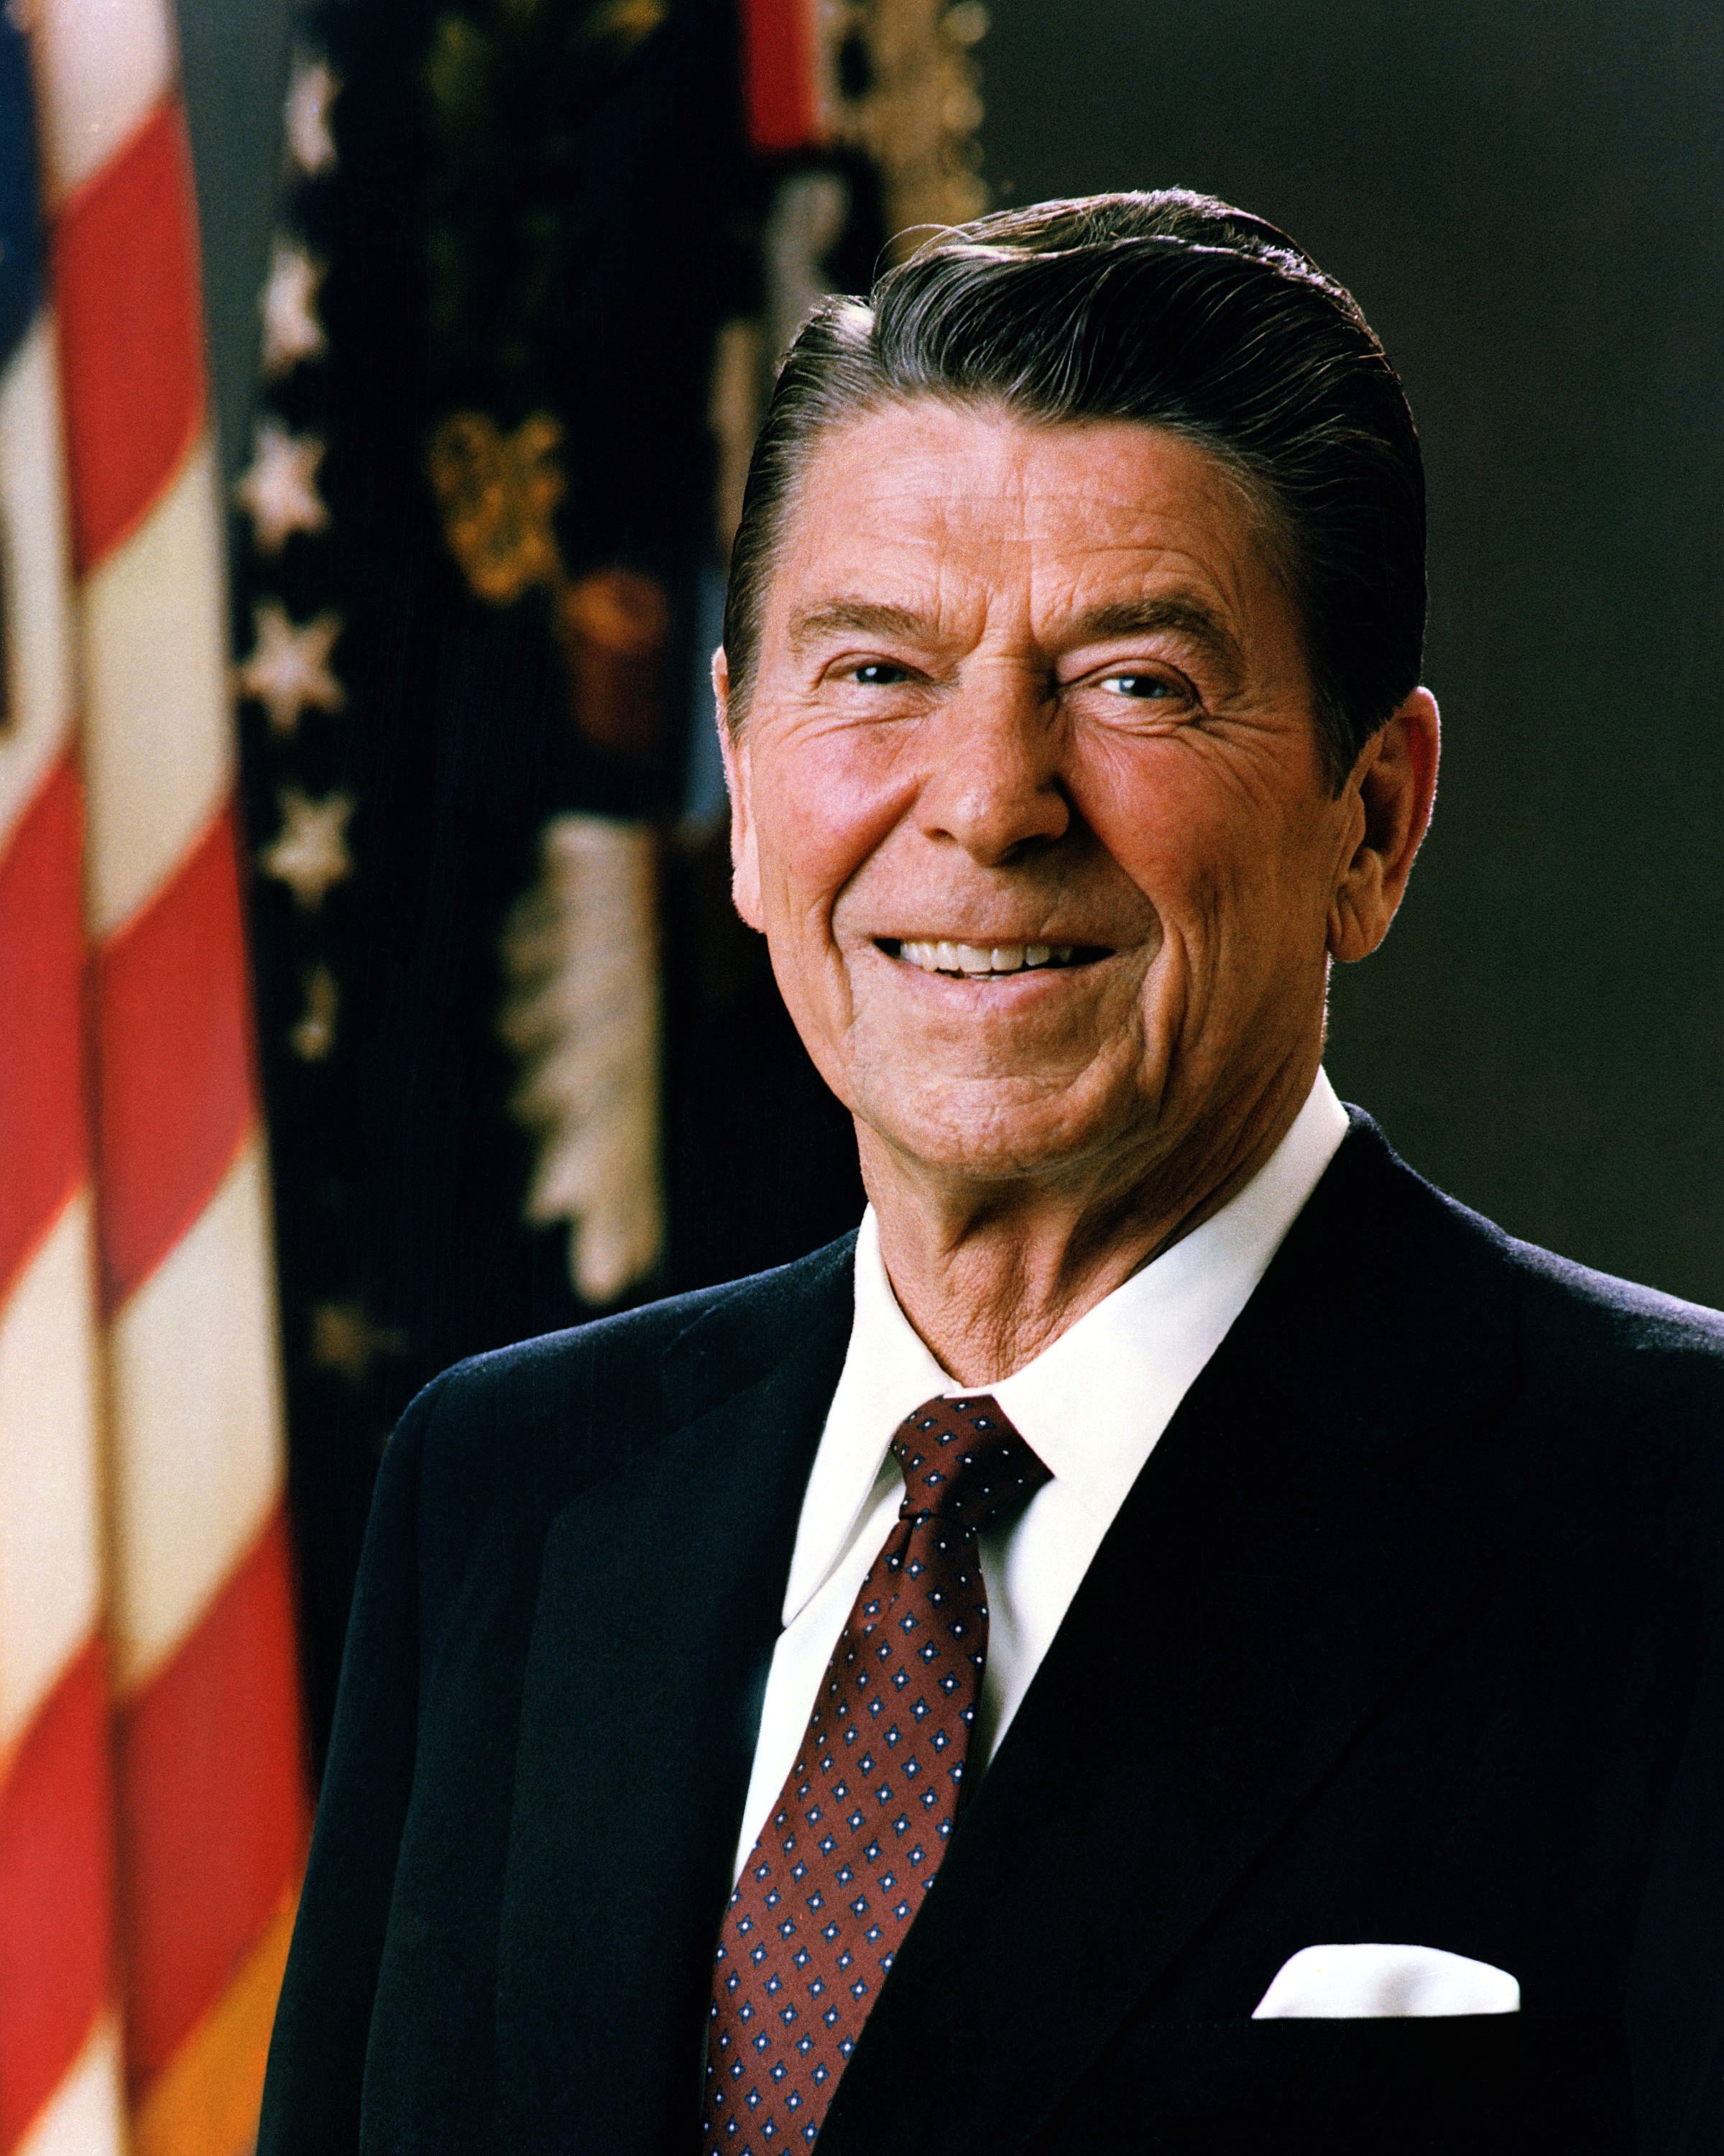 This is a picture of Ronald Reagan during his presidency.